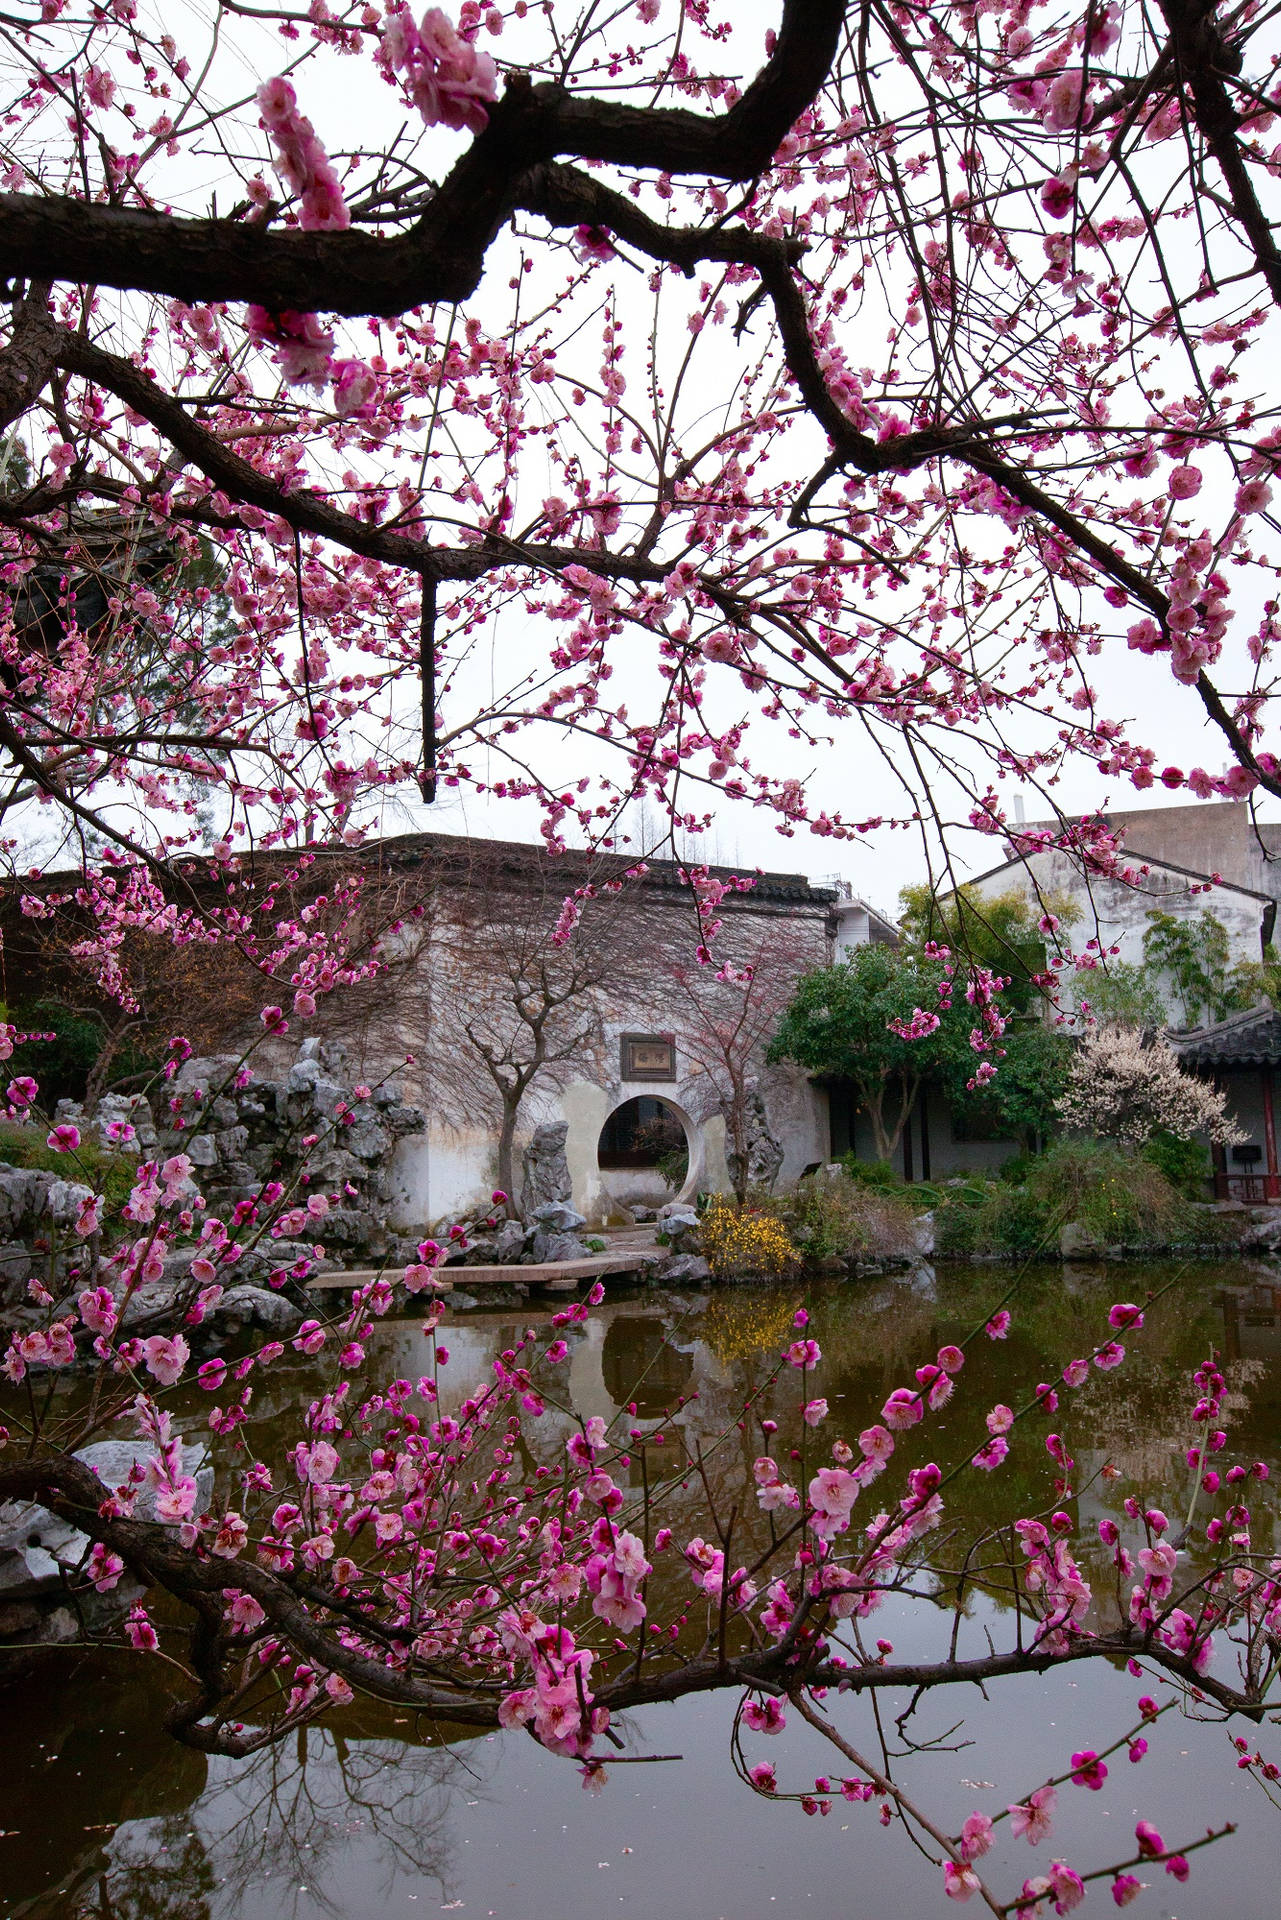 A Picturesque View Of The Serene Waters And Traditional Architecture In Suzhou, China